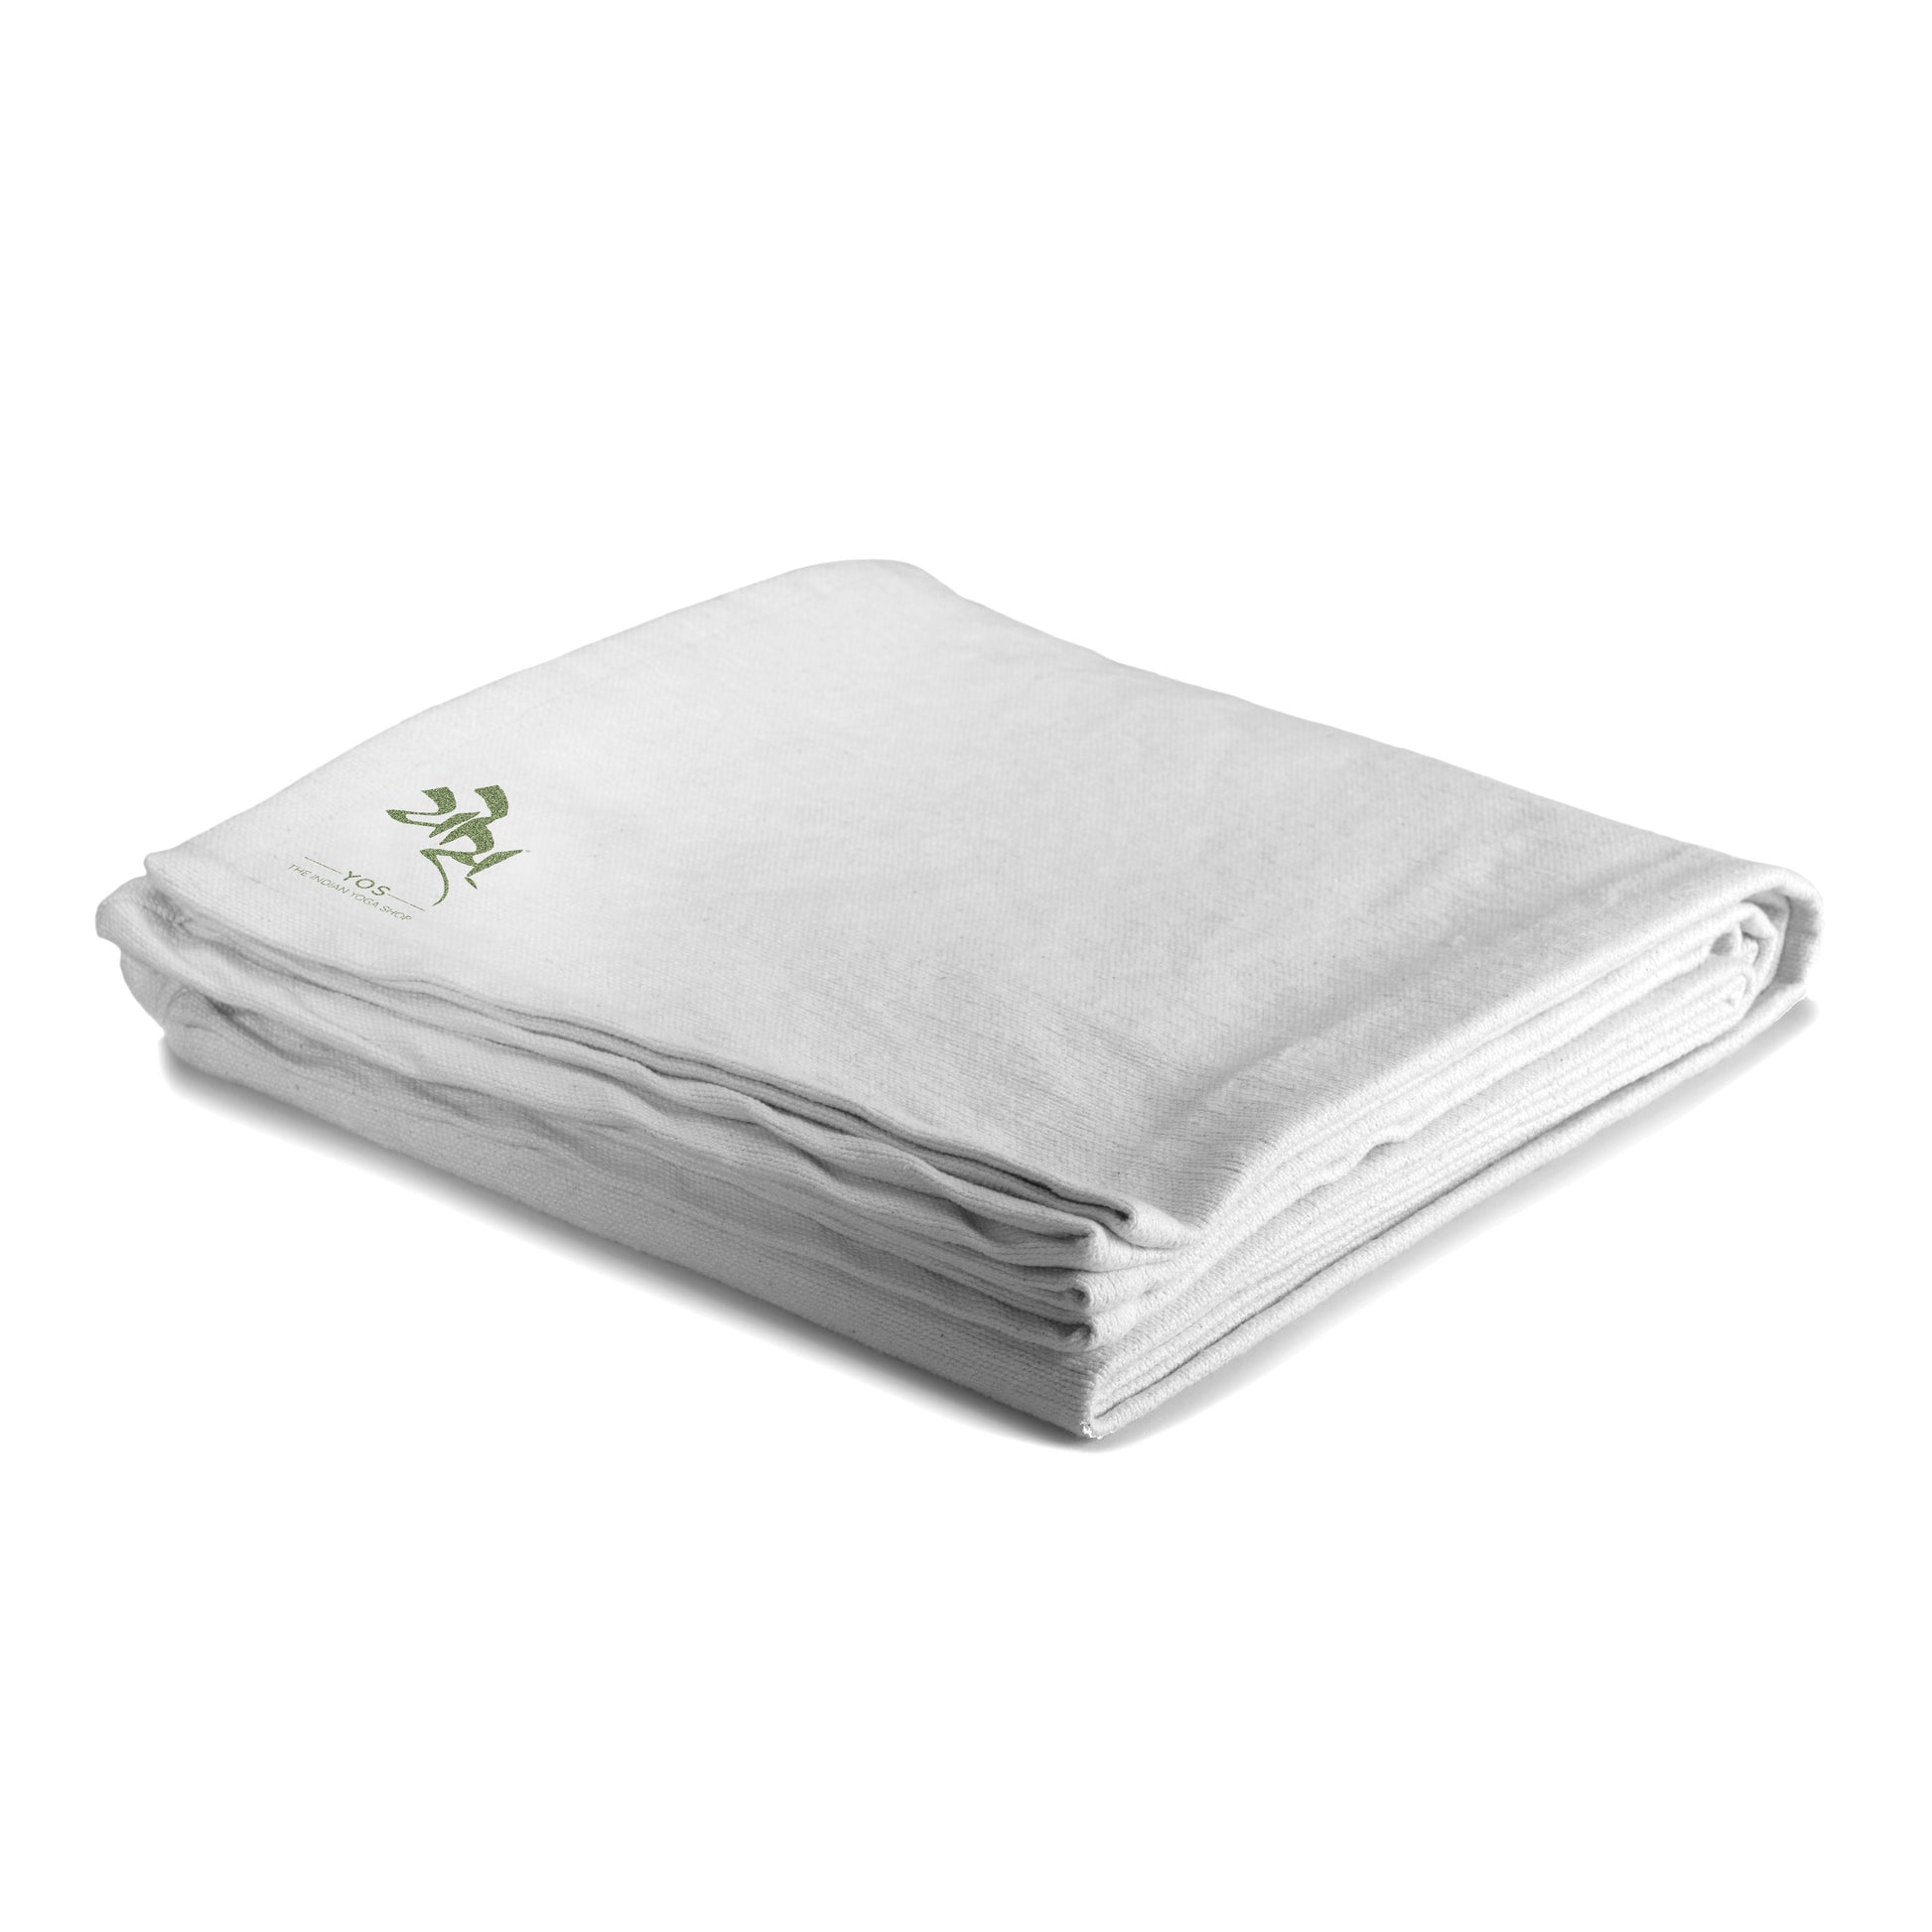 Cotton Yoga Blanket: Soft, Warm, and Essential for Yoga Sessions – Yos -  The Indian Yoga Shop